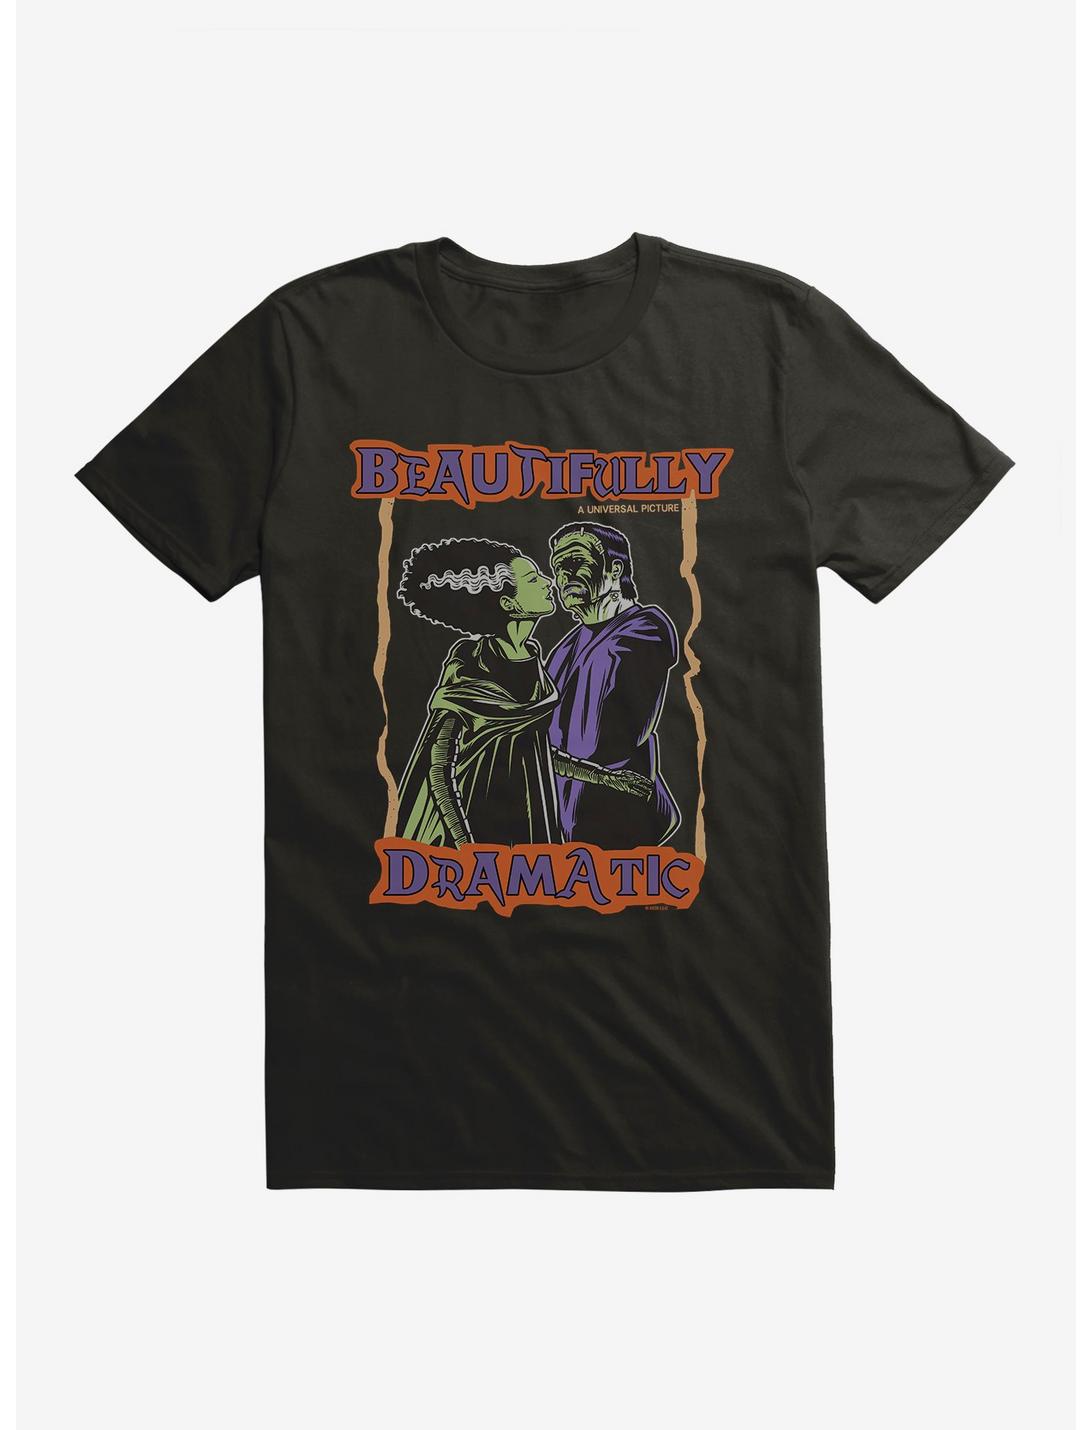 Universal Monsters Bride Of Frankenstein Beautifully Dramatic T-Shirt ...